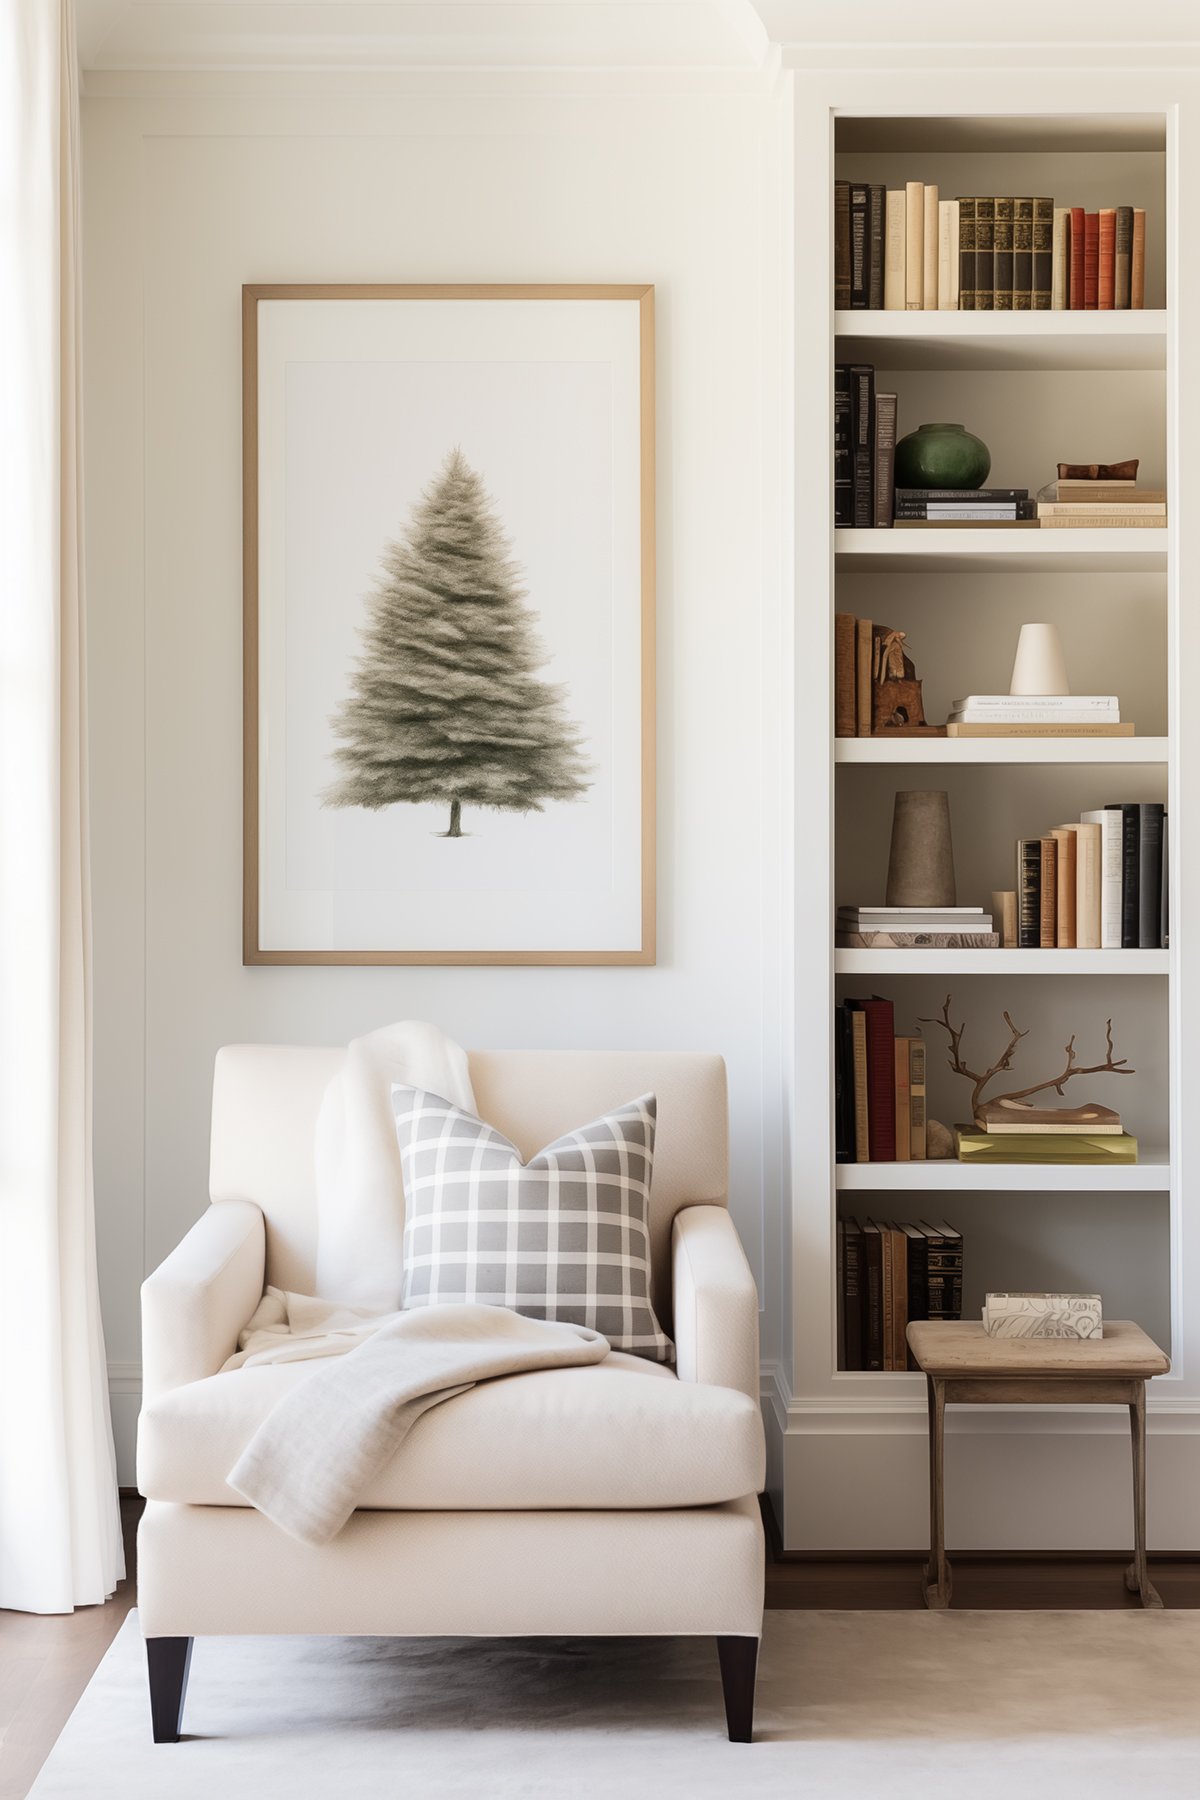 framed print of a Christmas tree hung on a wall behind an armchair